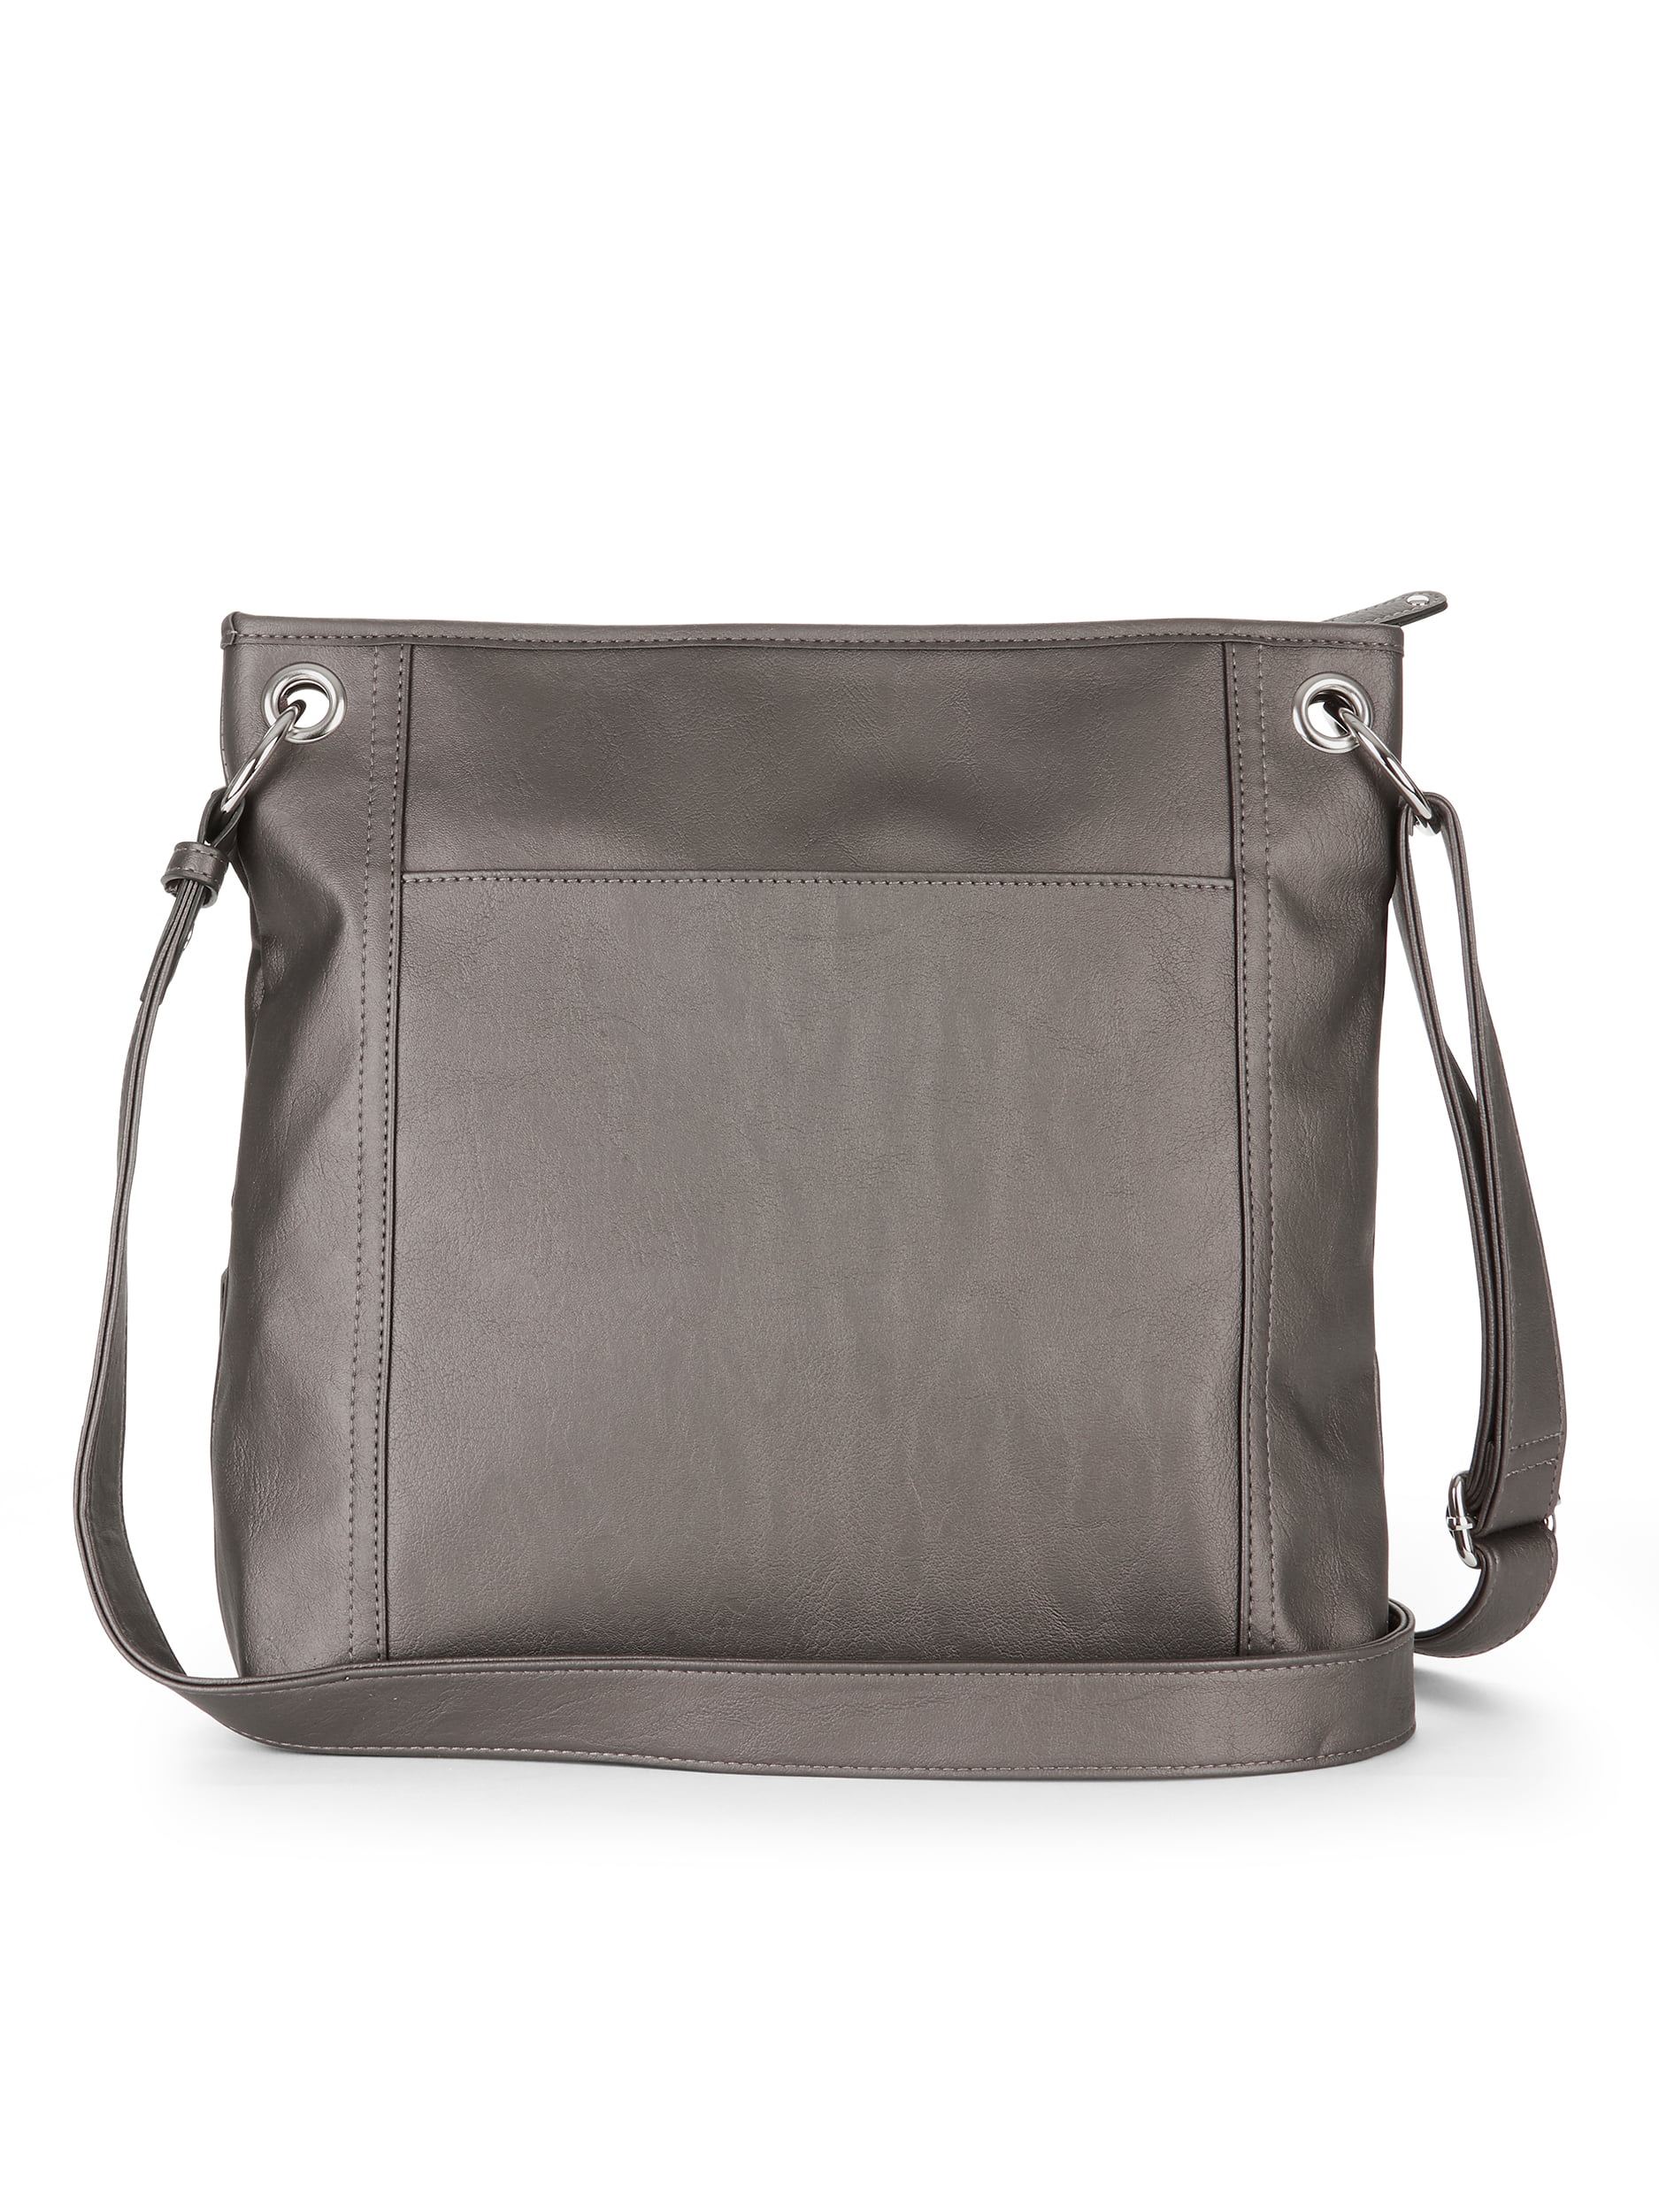 Can anyone find me a more upscale version of this bag? I want to treat my  MIL to something fancier : r/femalefashionadvice